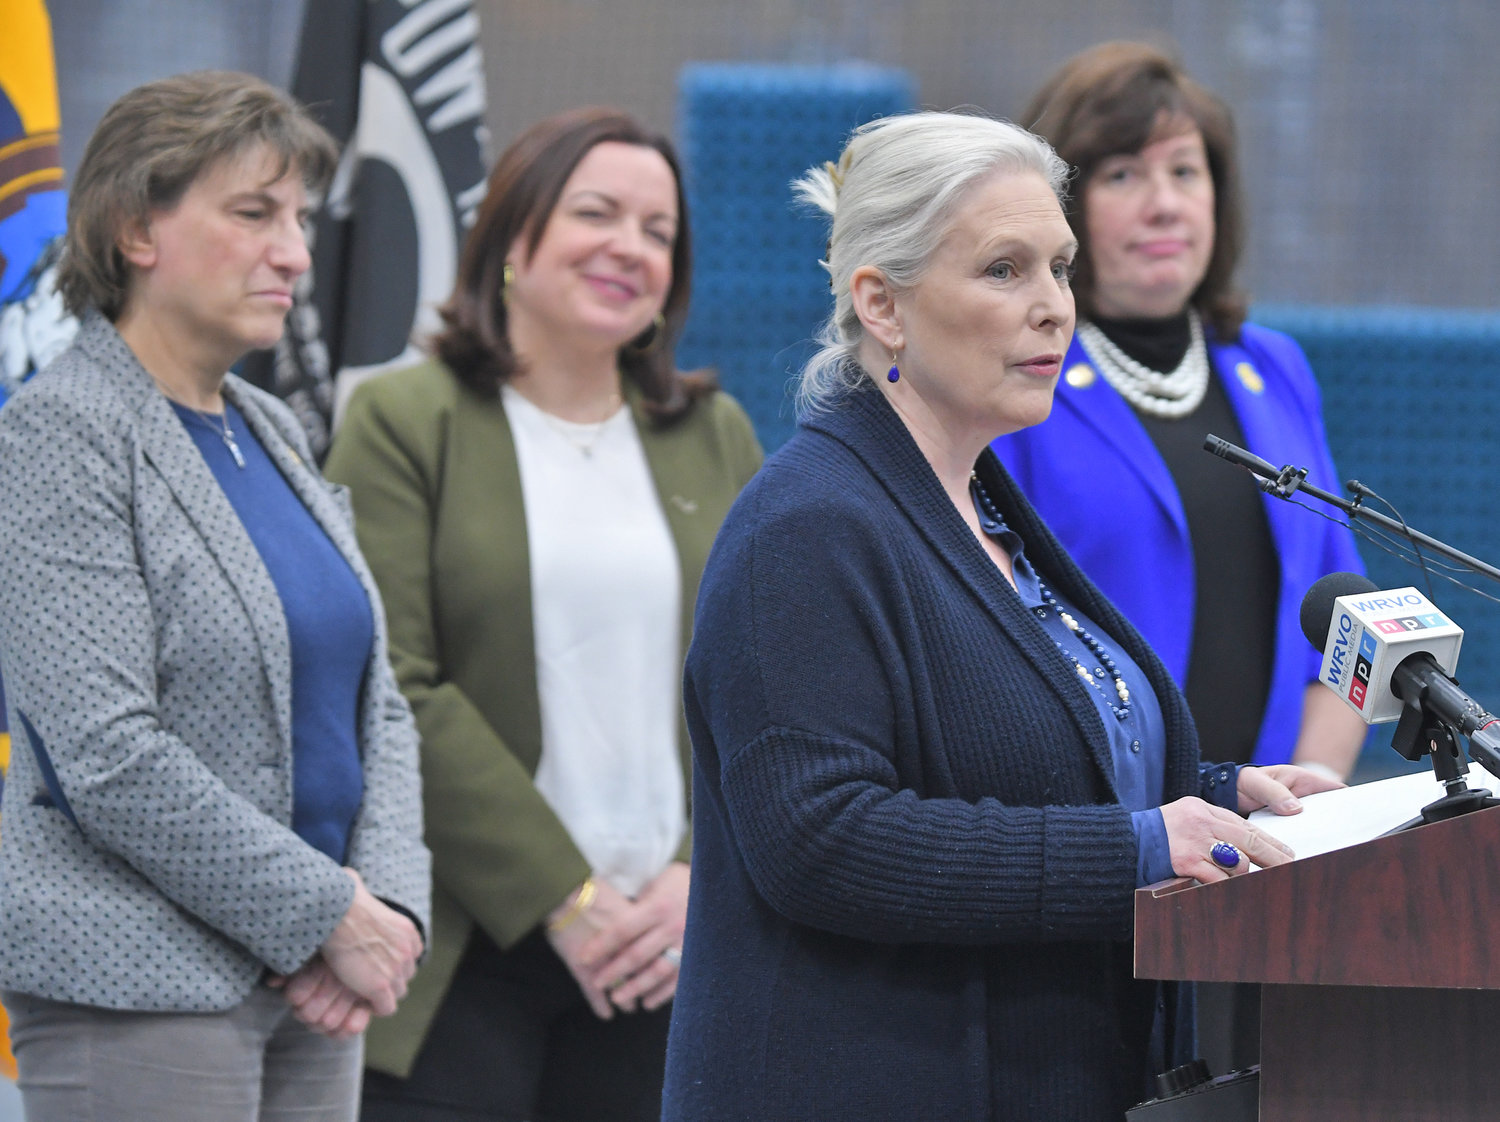 US Sen. Kirsten Gillibrand talks at Innovare Advancement Center with Rome Mayor Jacqueline Izzo; Heather Hage, President and CEO of the Griffiss Institute; and Assemblymember Marianne Buttenschon in the background Friday afternoon February 10.